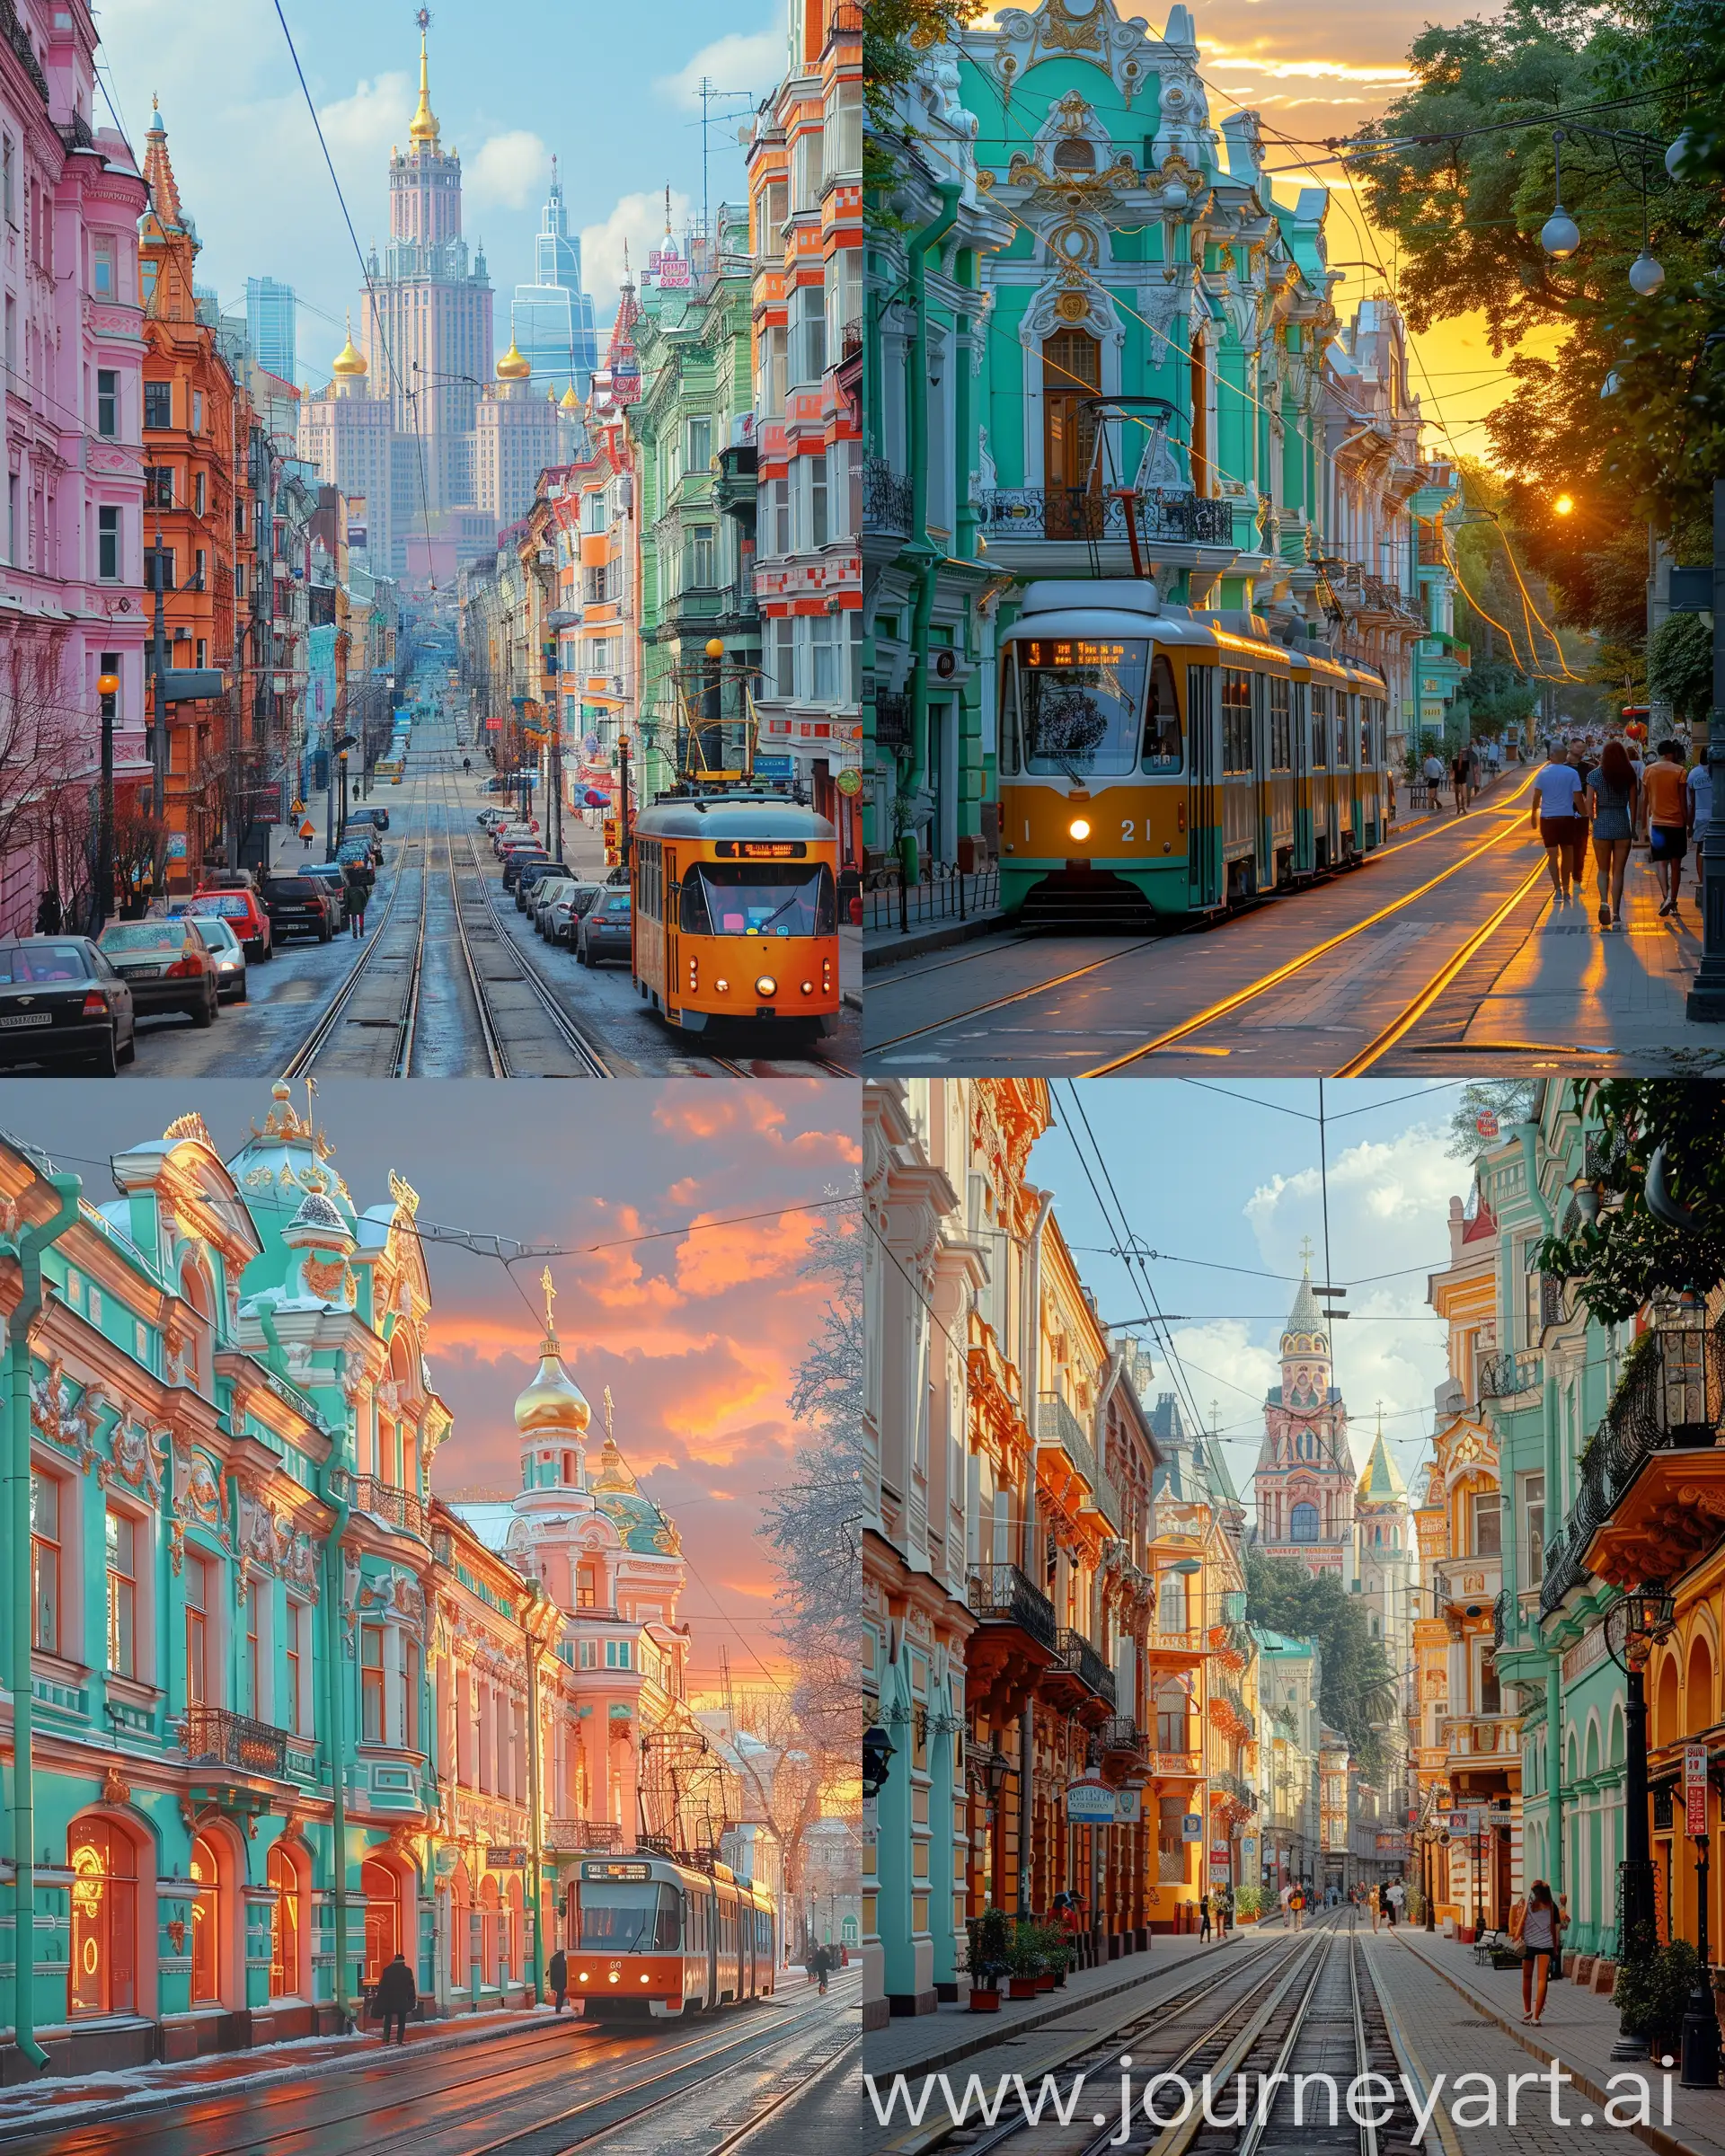  Russian city street with tram tracks and buildings, fusion of Constructivism, Rococo, and Art Deco styles, dynamic angles, geometric shapes, ornate details, pastel color palette, interplay of shadow and light, bustling atmosphere, pedestrians --ar 4:5 --s 750 --c 15 --relax --v 6